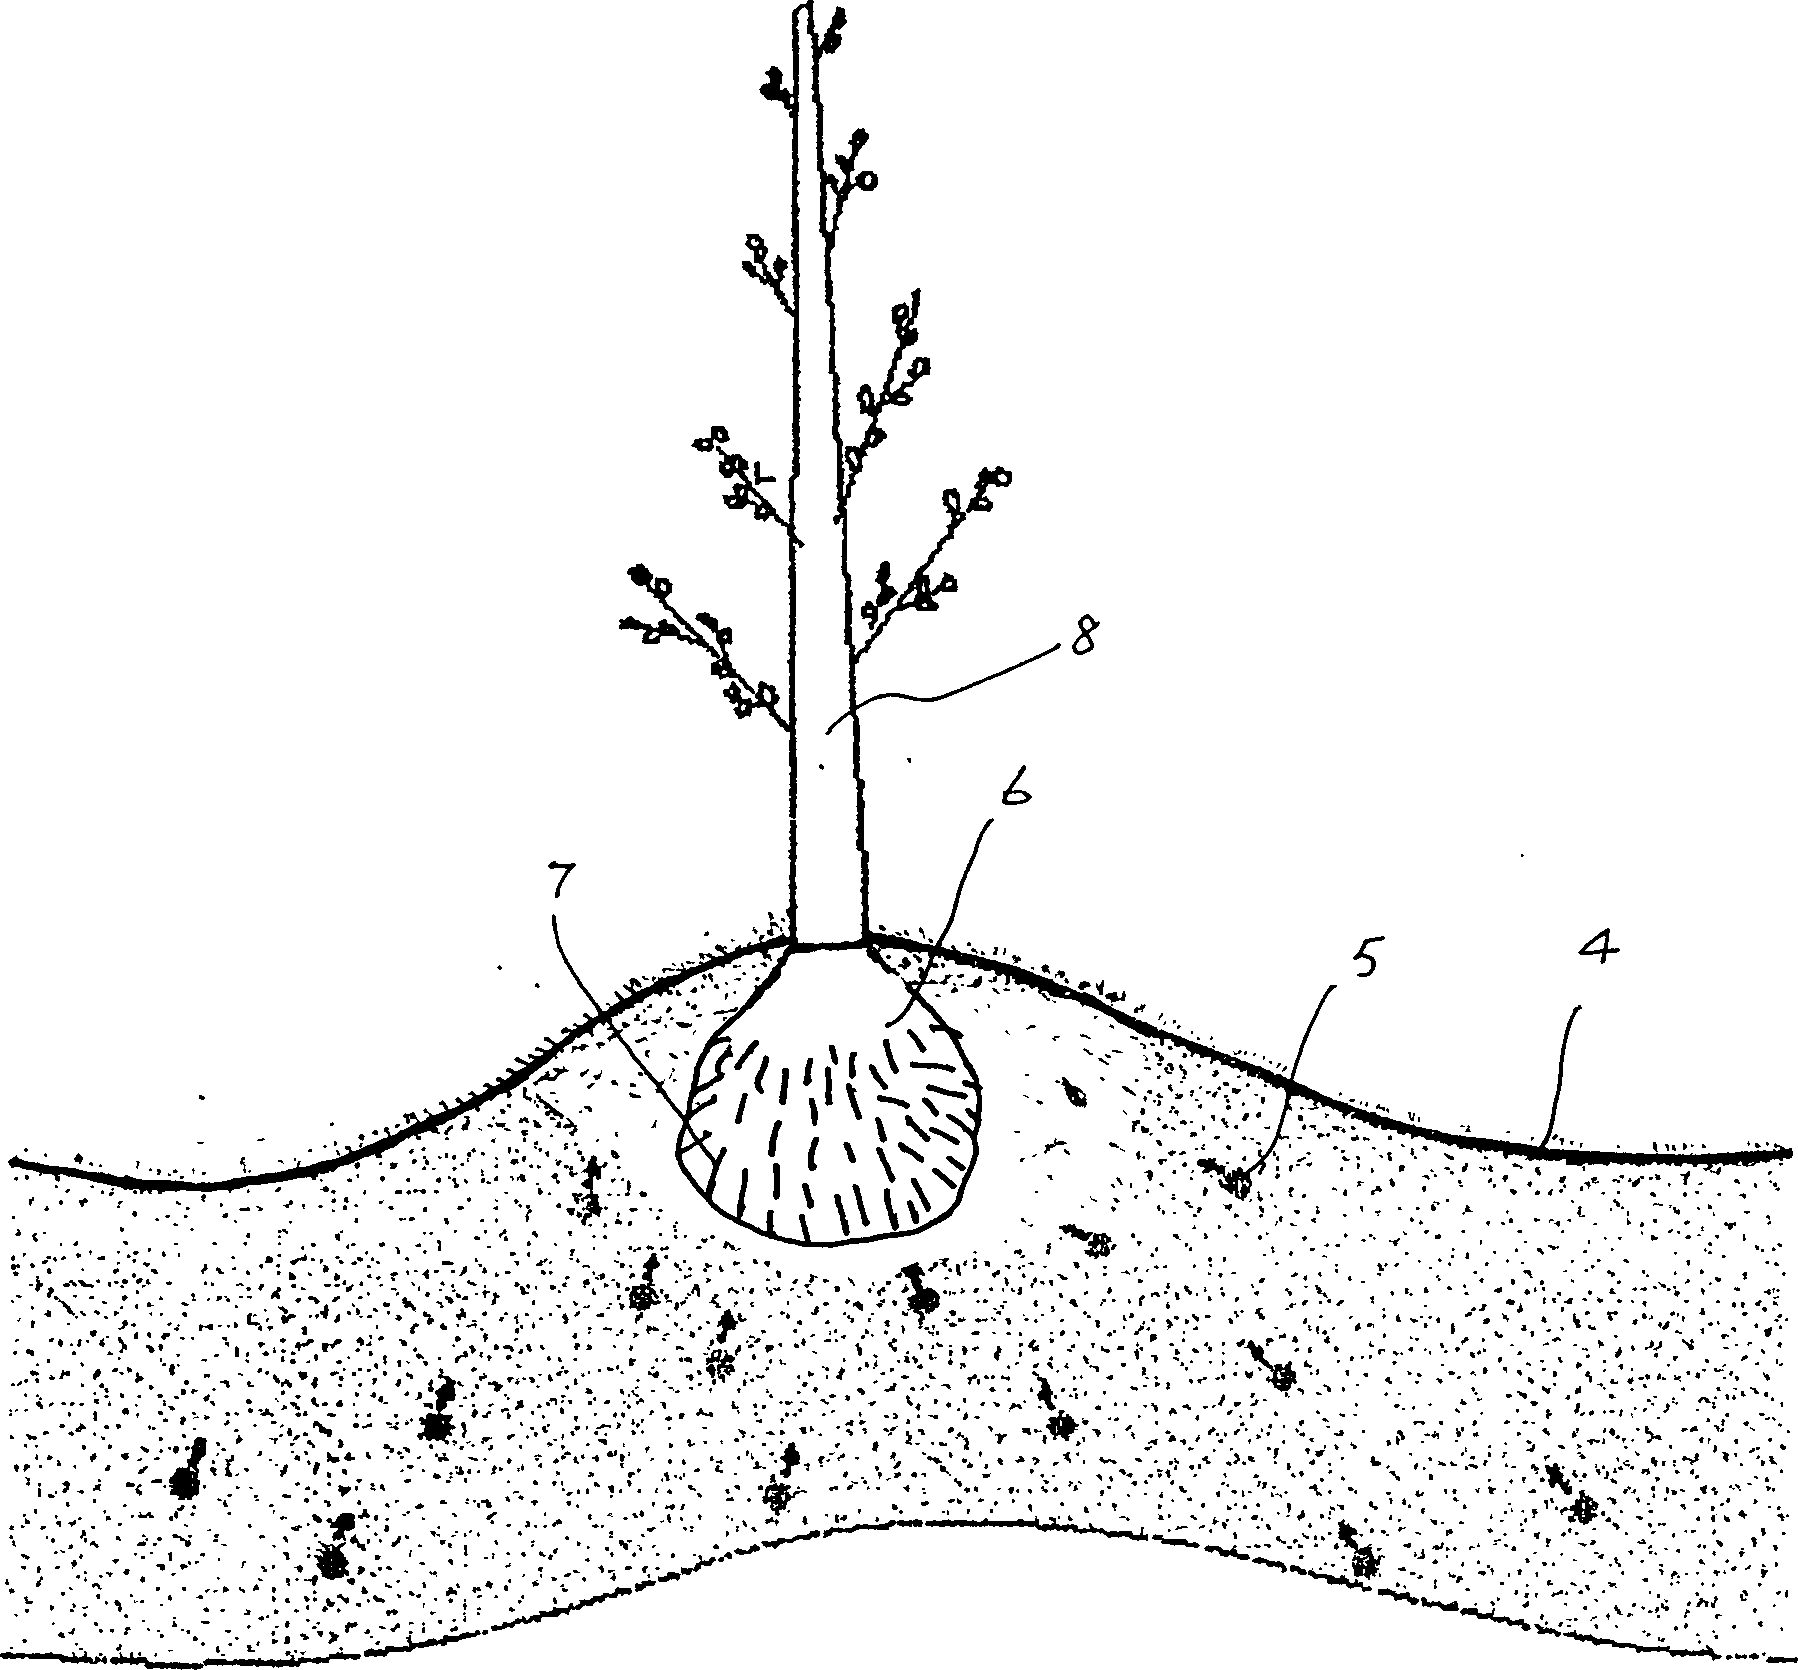 Method for sand-fixing, water preserving, planting grass and tree afforestation desert